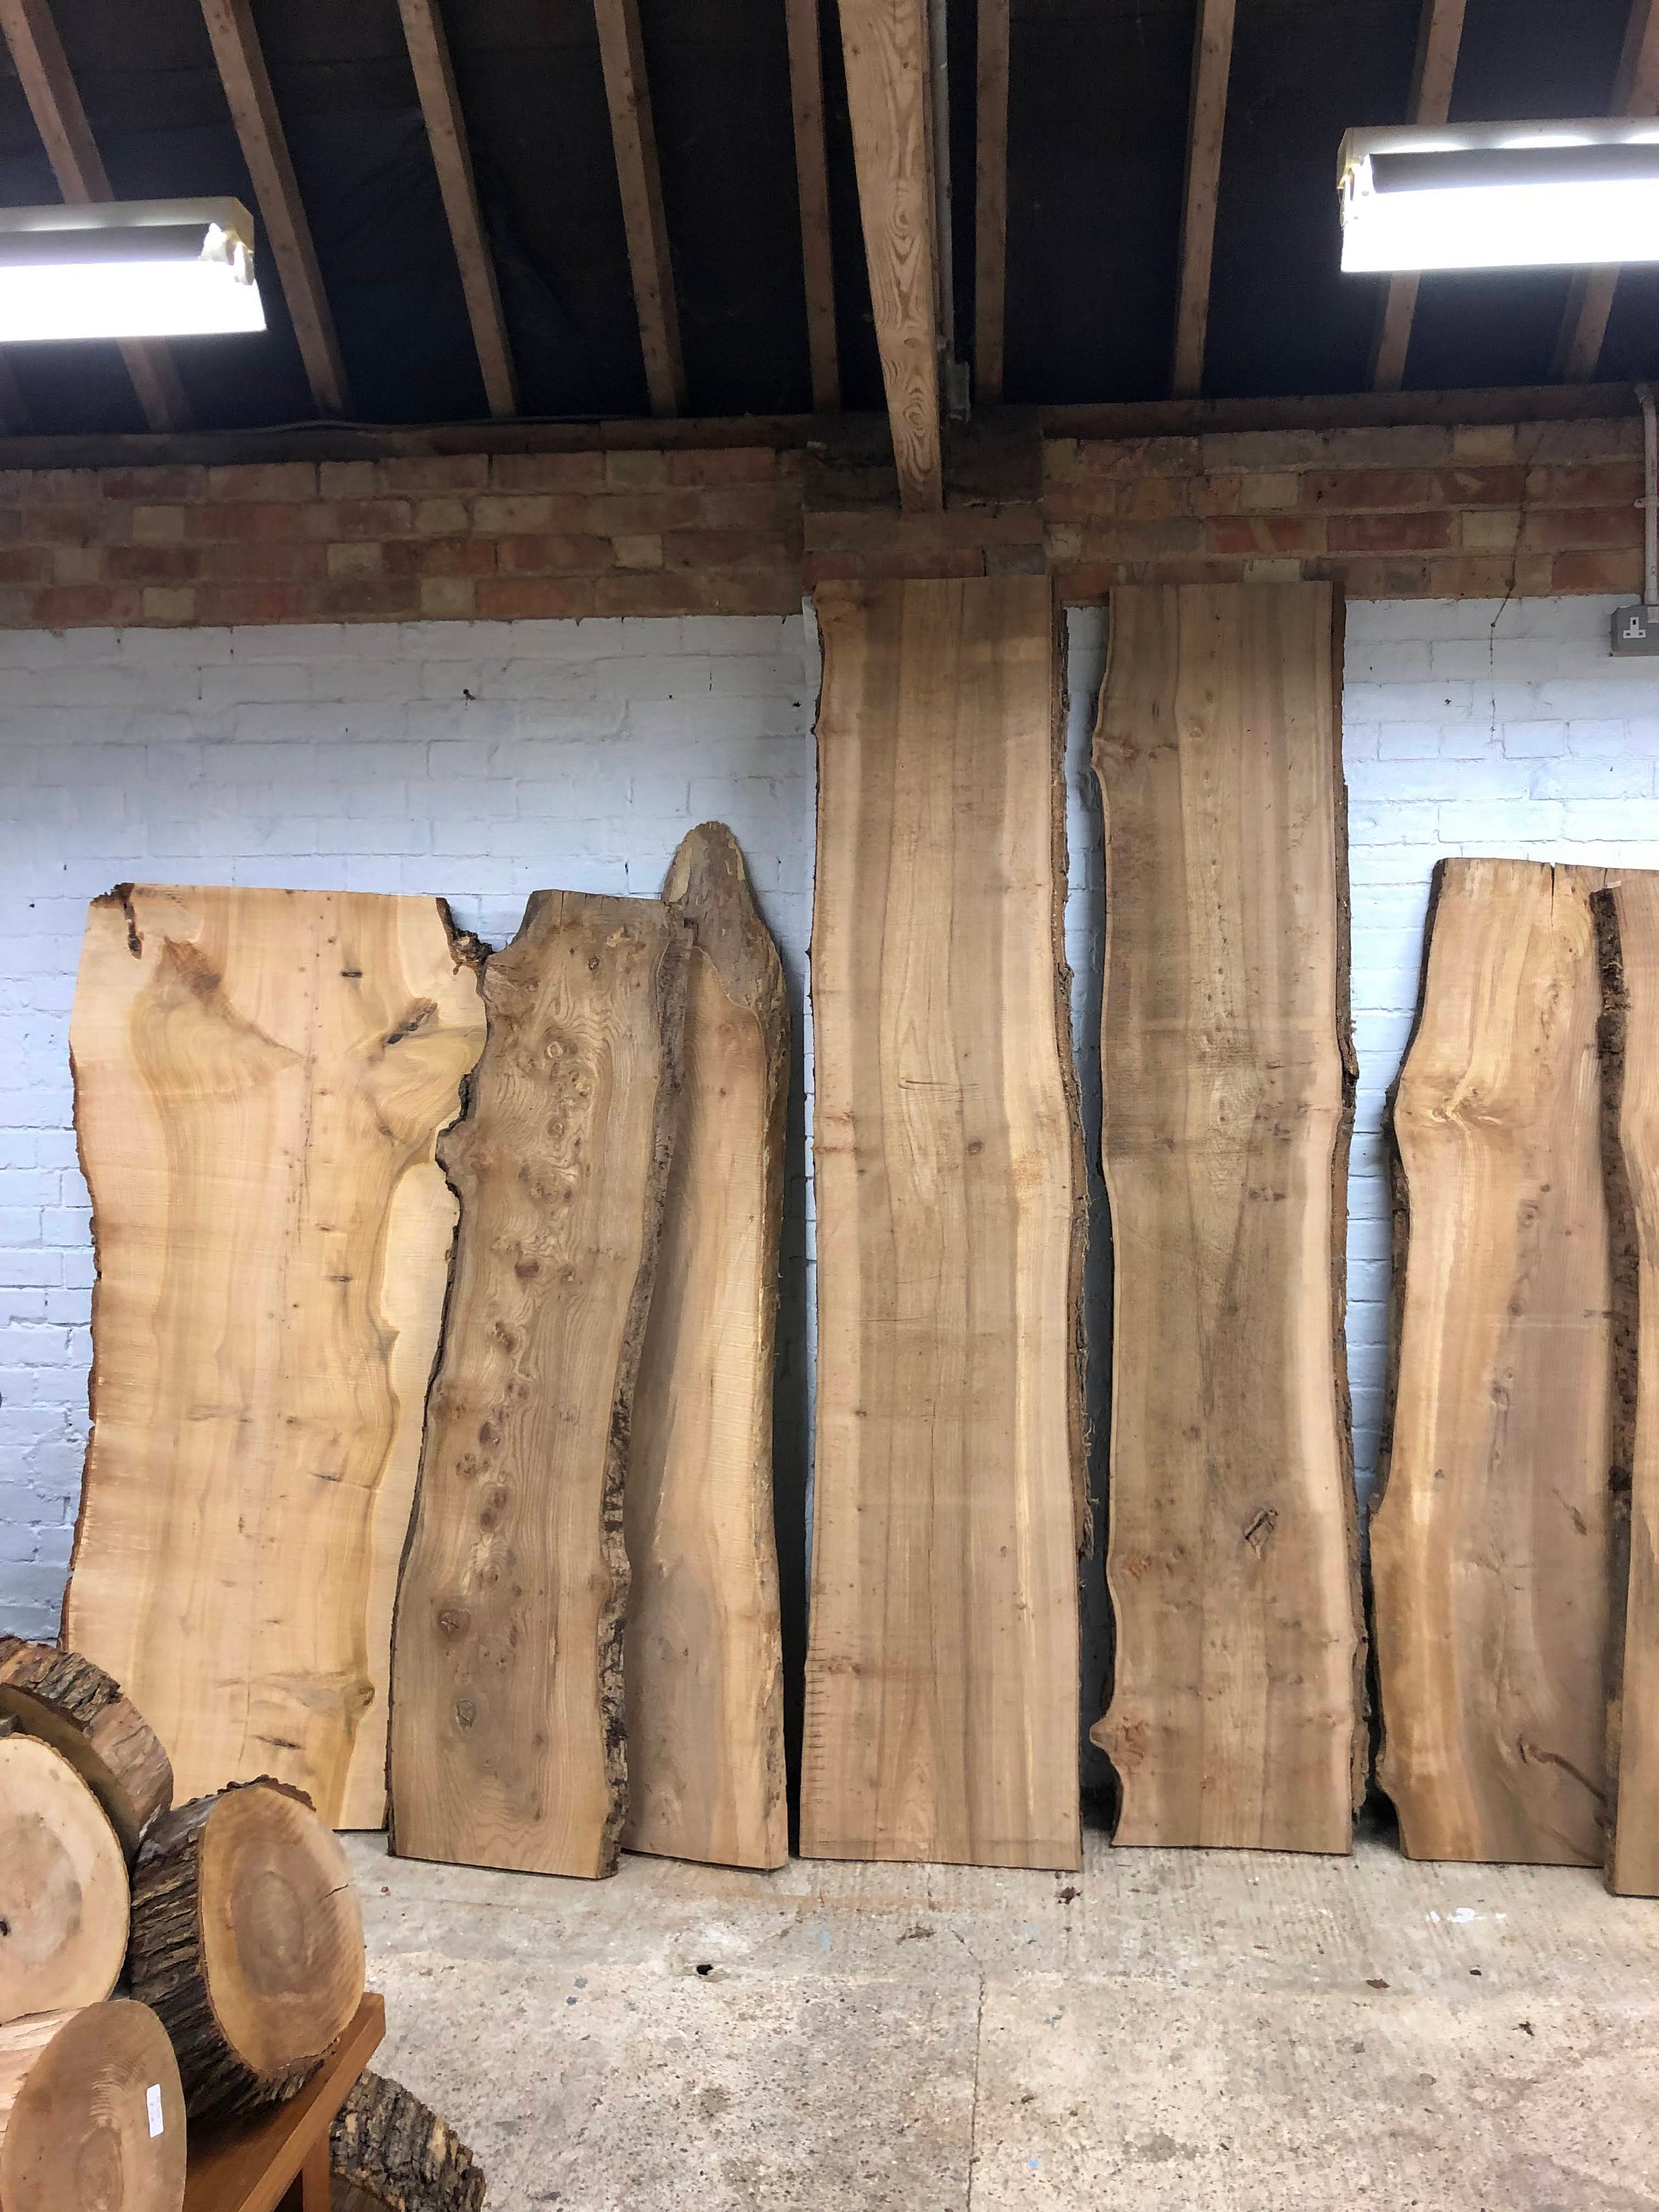 Live Edge Kiln Dried English Timber Hardwood Elm Oak Ash Wood Boards Slabs  Pieces Wood Work Project Crafts Pyrography All Sizes Available 